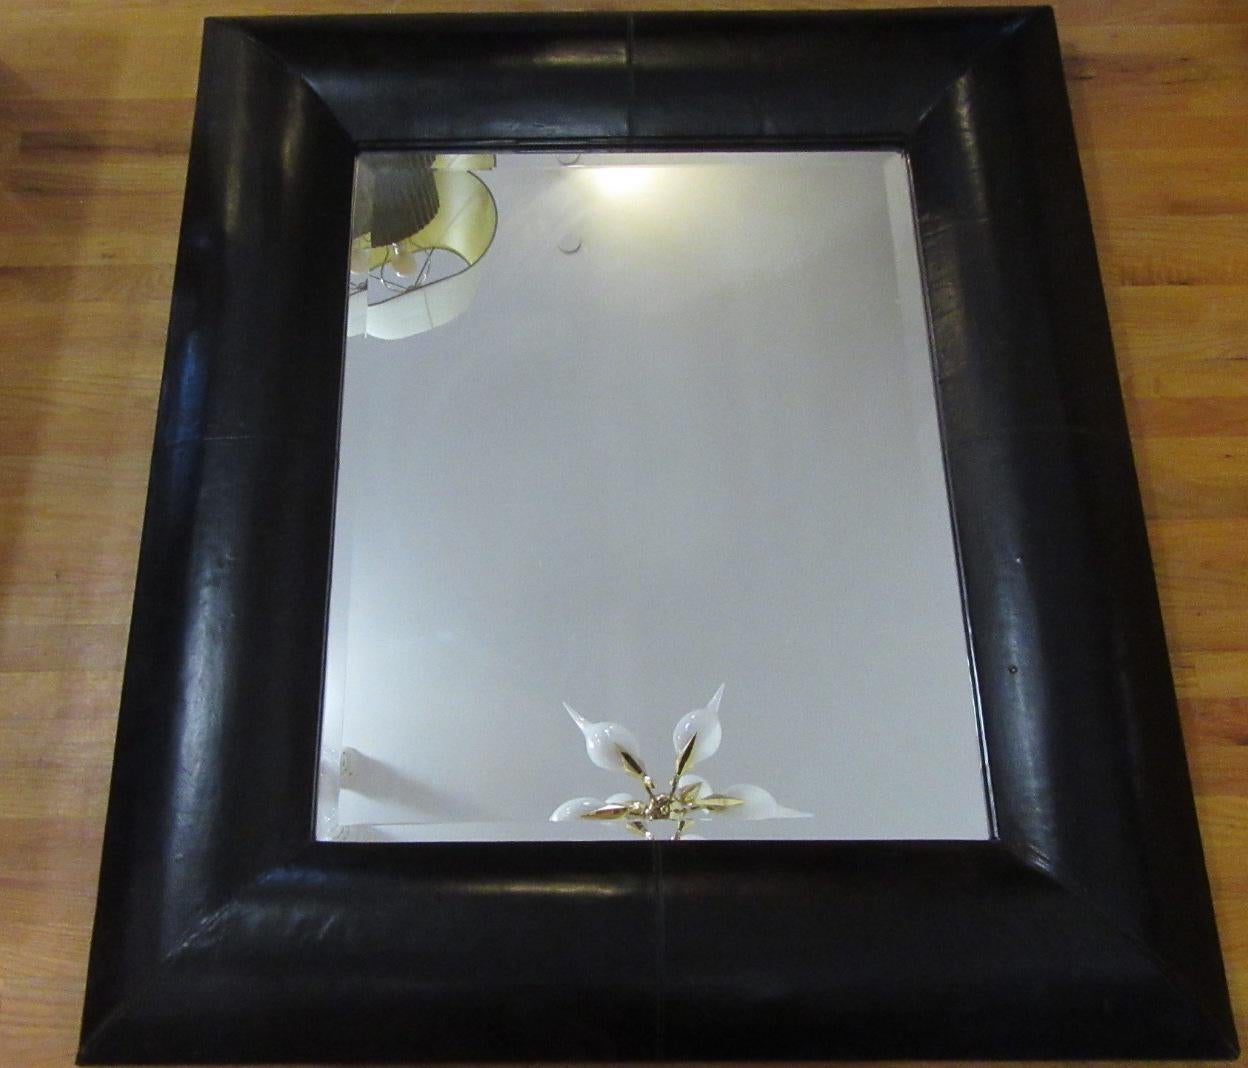 Beautifully crafted black leather mirror made in France.